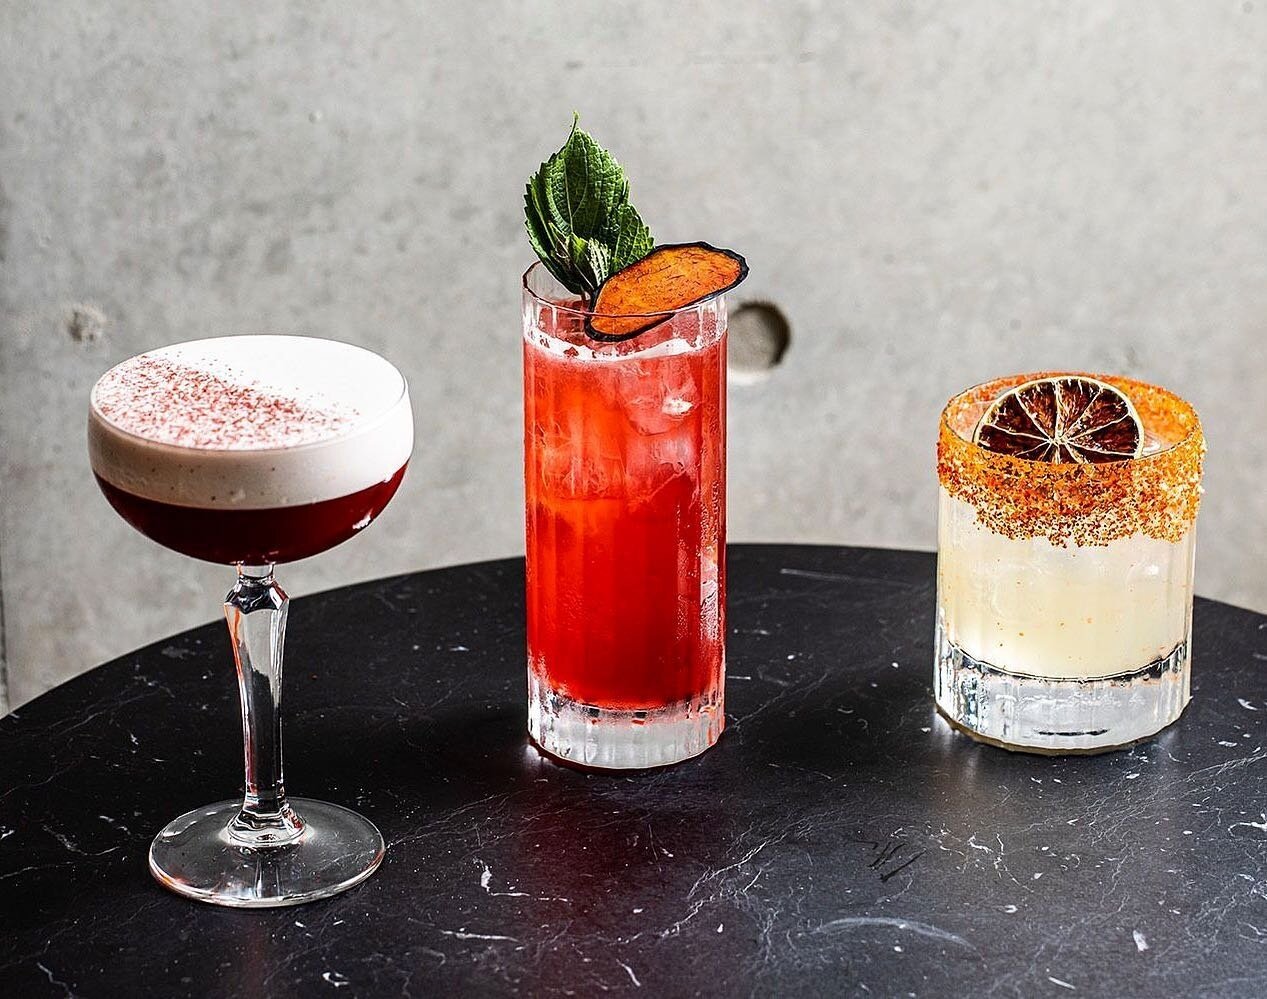 We love a good cocktail, and you simply can't beat these epic ones at the @qtnewcastle rooftop bar 💥 ⁠
⁠
After checking into this luxurious Newcastle hotel on our 'Timeless Treasure' package, take the lift to the rooftop and settle in with a spritz 